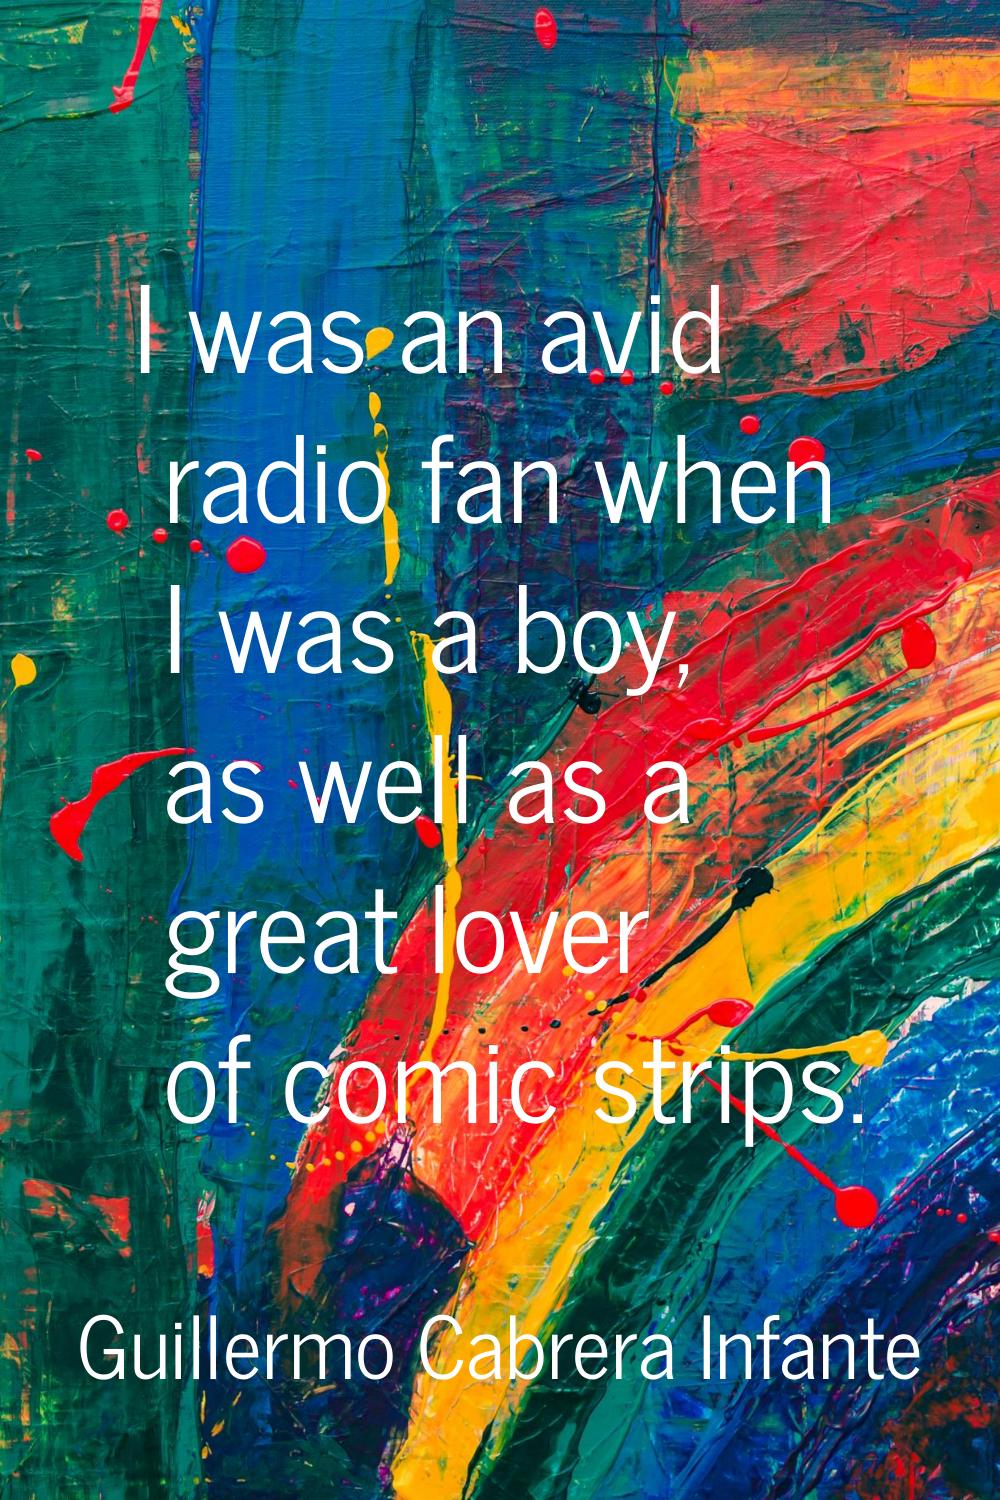 I was an avid radio fan when I was a boy, as well as a great lover of comic strips.